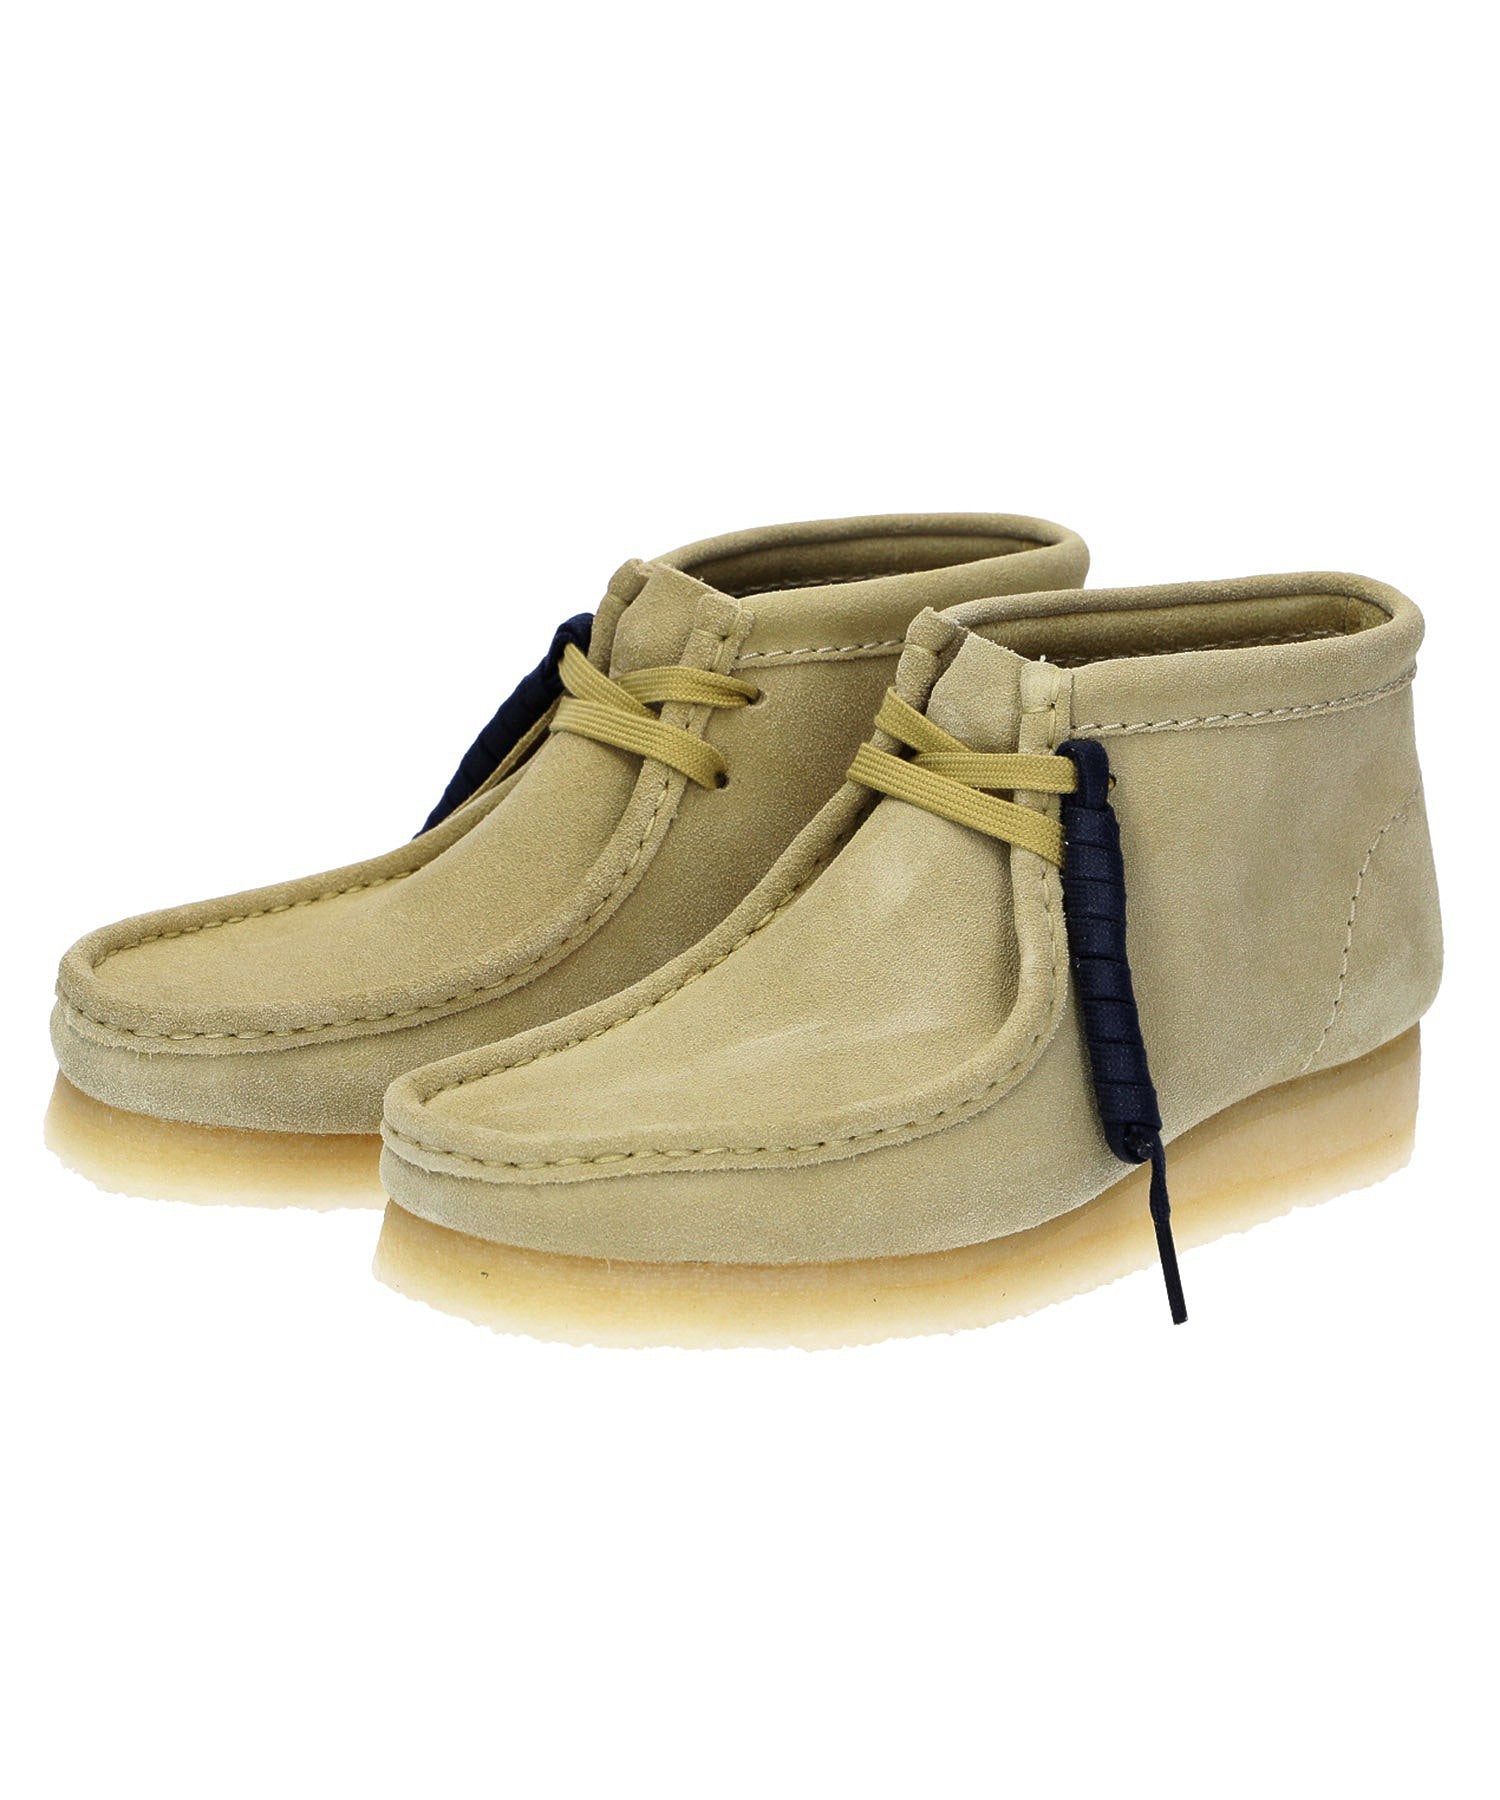 CLARKS 26155520 Wallabee Boot. Maple Suede X-girl